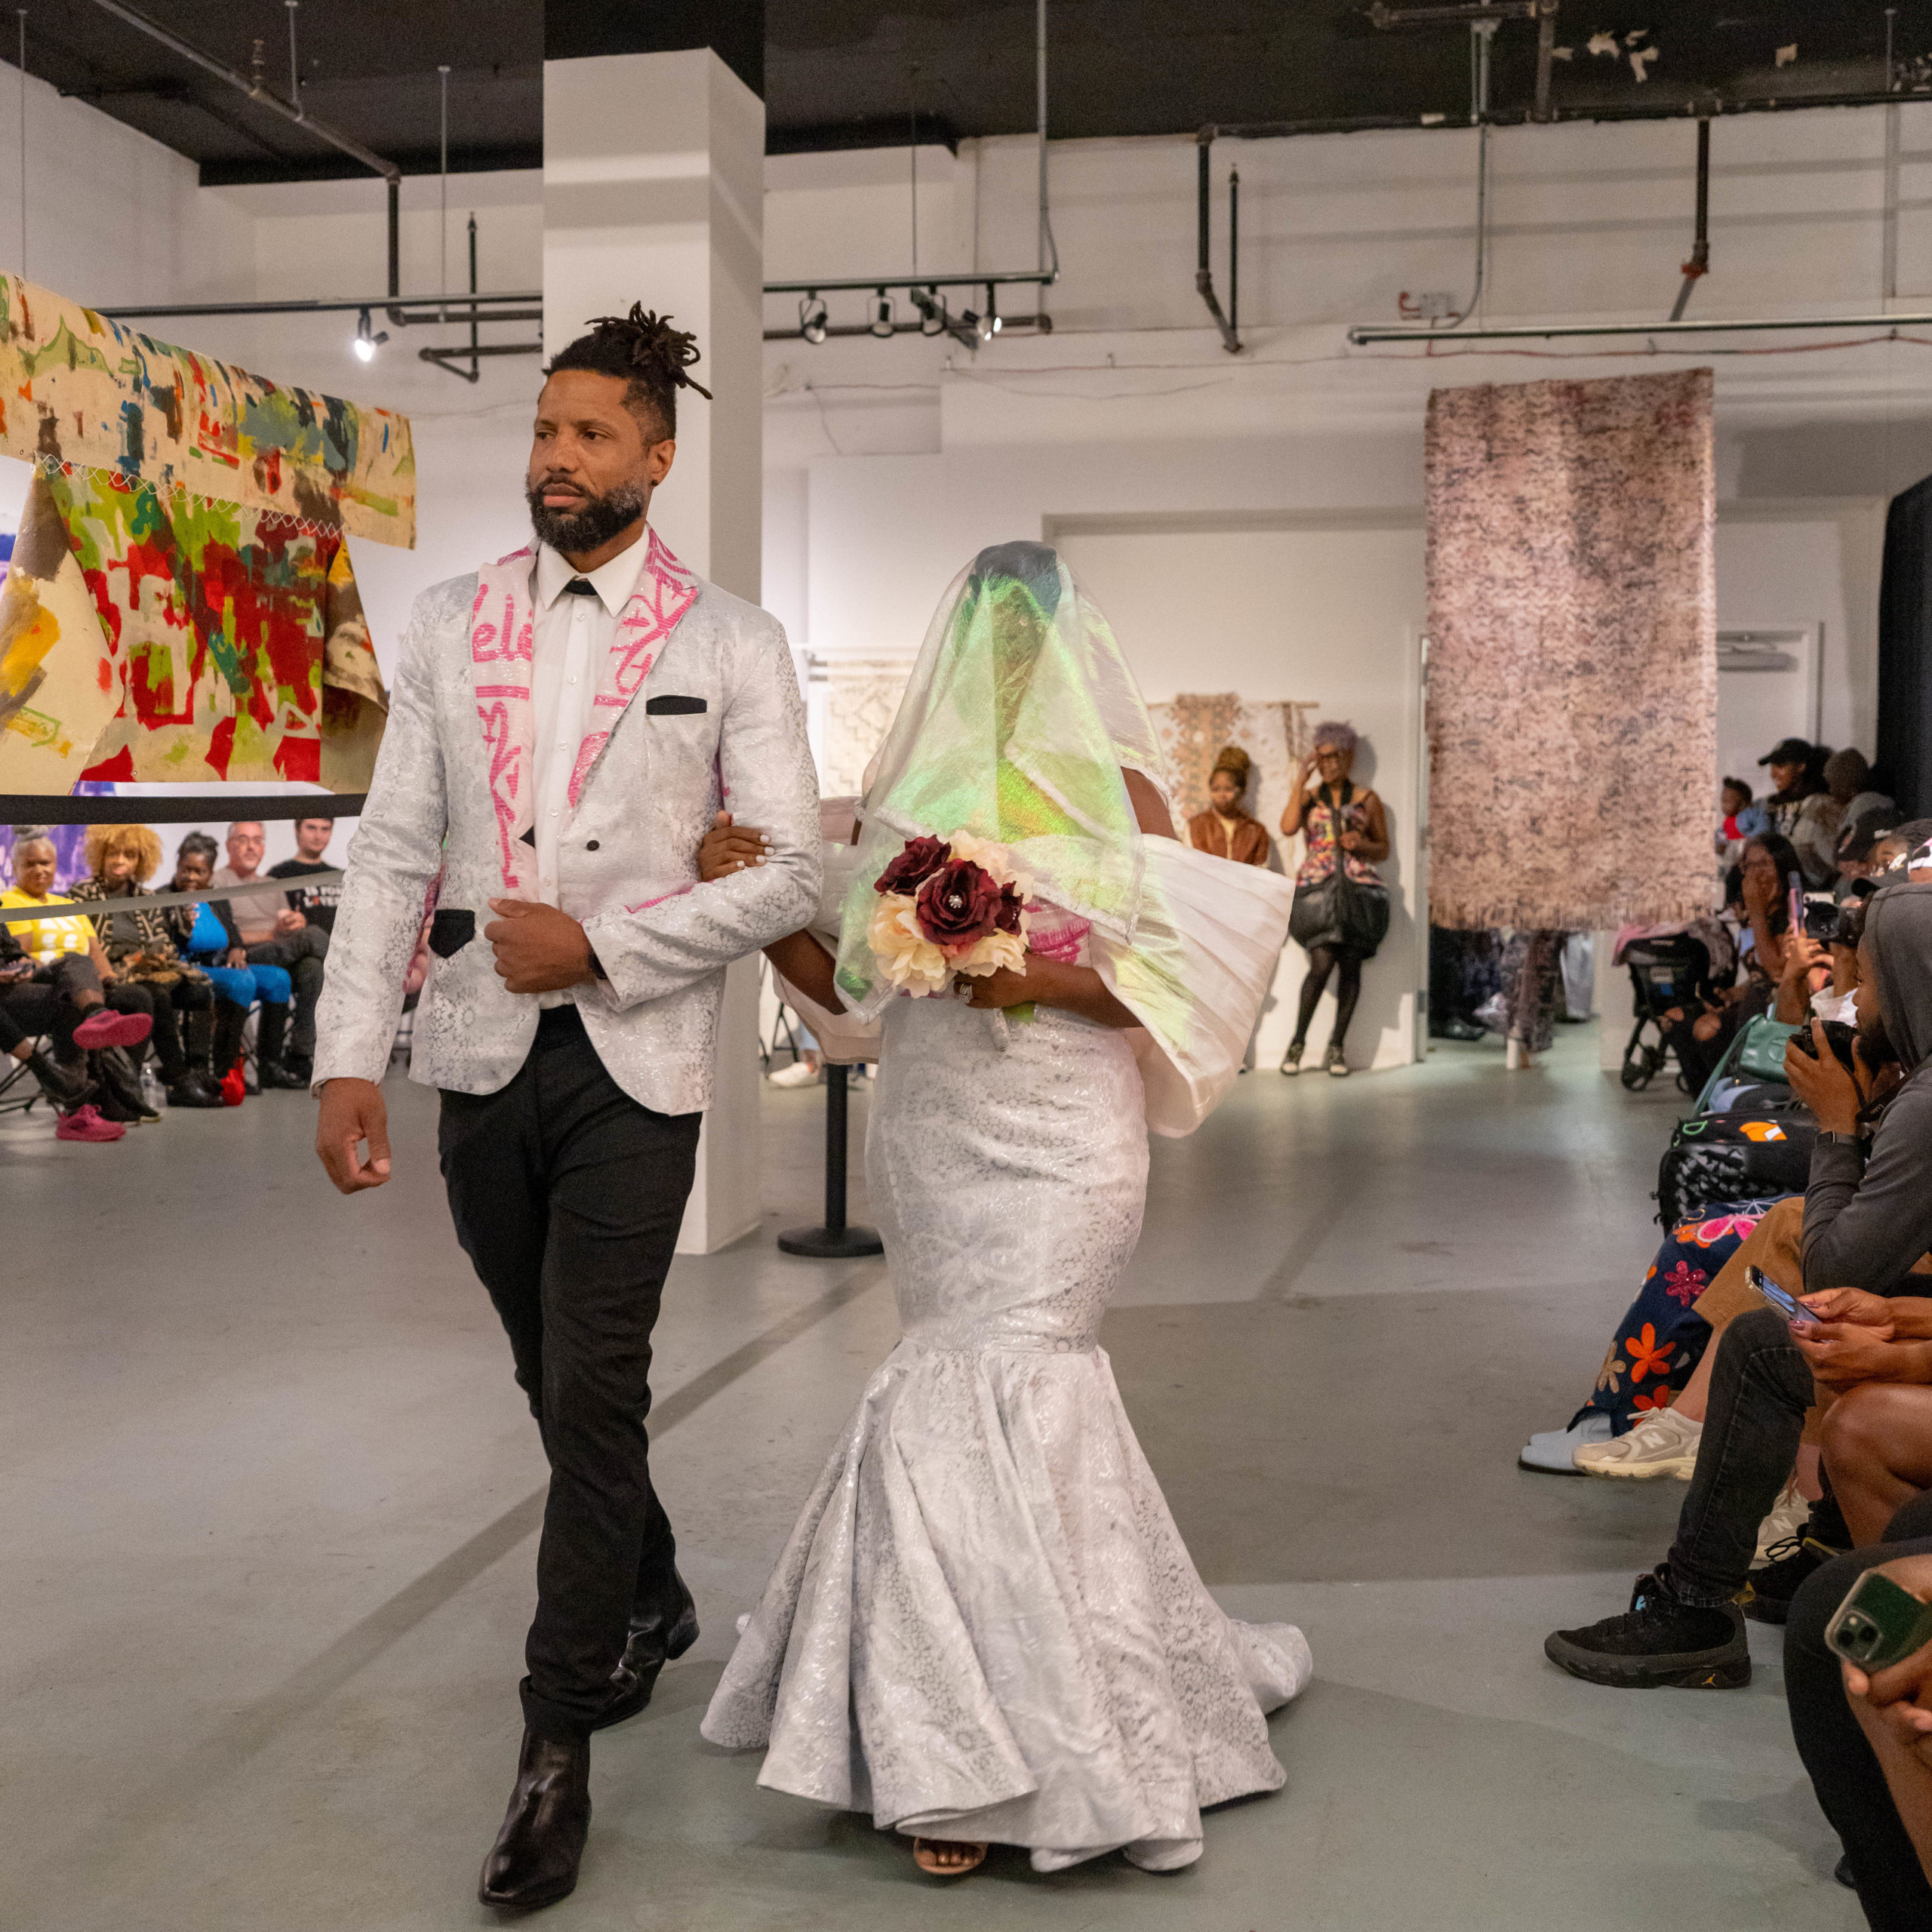 African Bride and groom wearing Adinkra prints down an aisle on a fashion runway